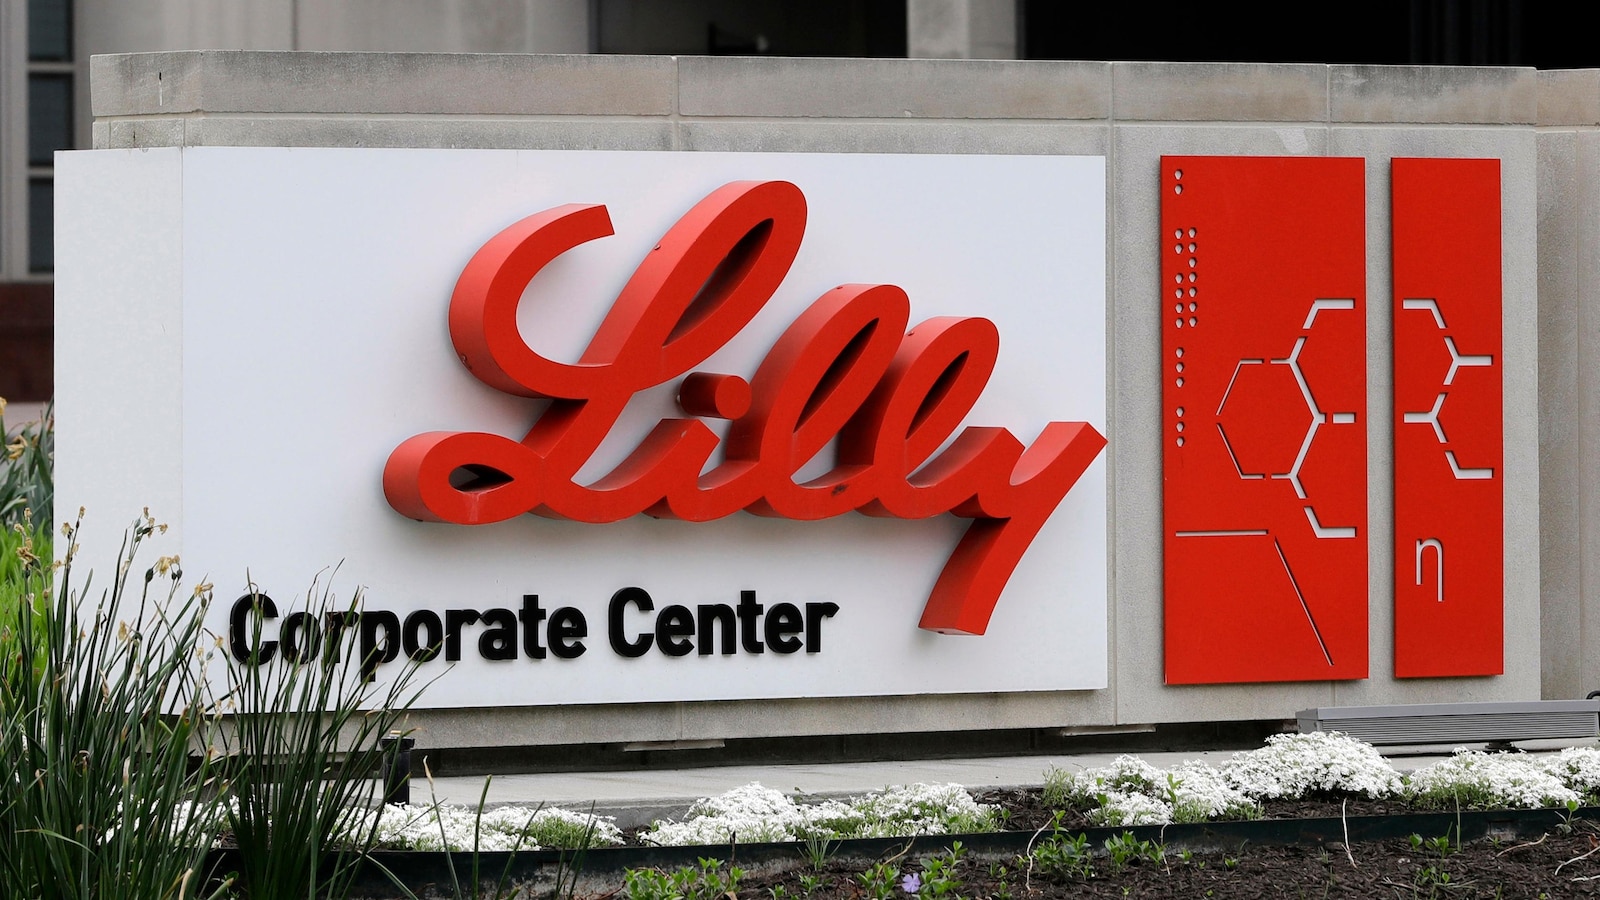 Eli Lilly exceeds forecast due to weight loss and diabetes drugs